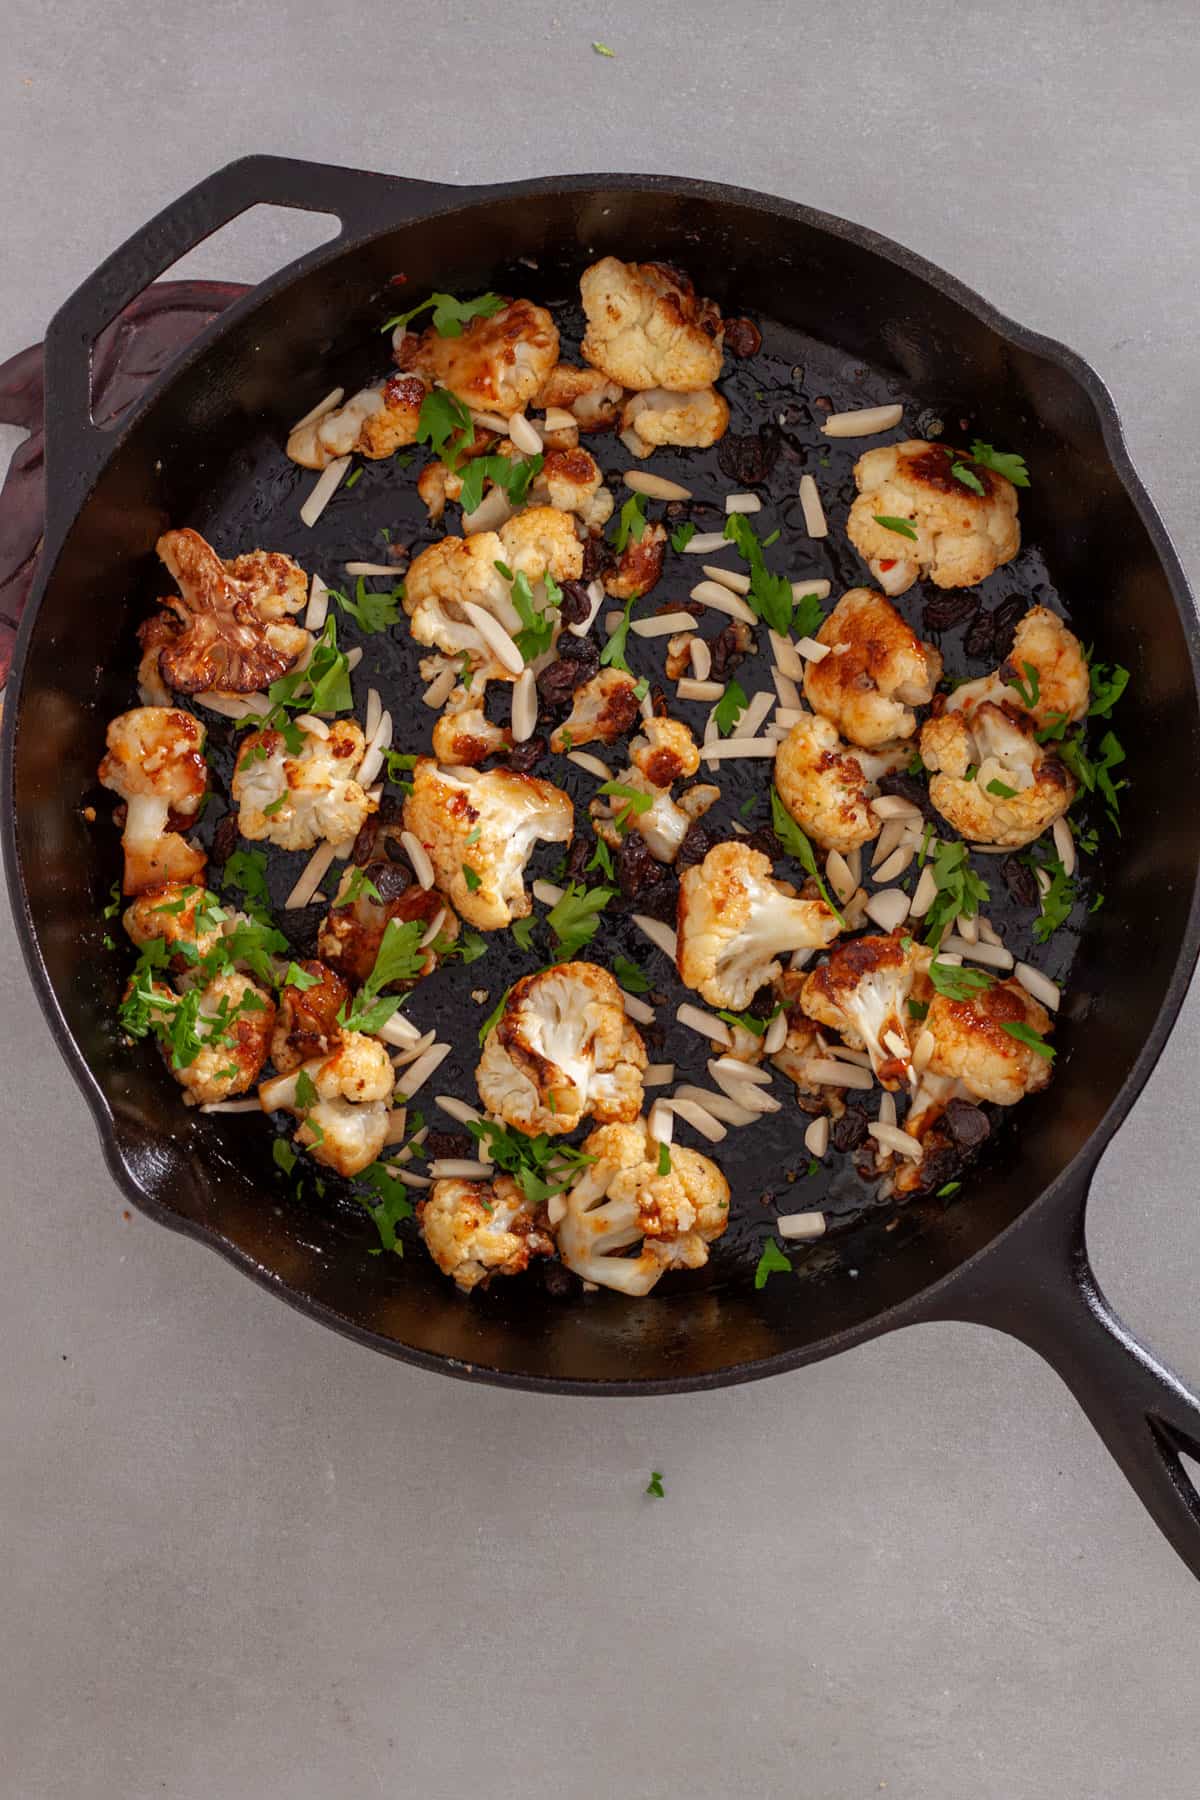 Sweet chili roasted cauliflower in a cast iron skillet topped with fresh parsley, slivered almonds and raisins.